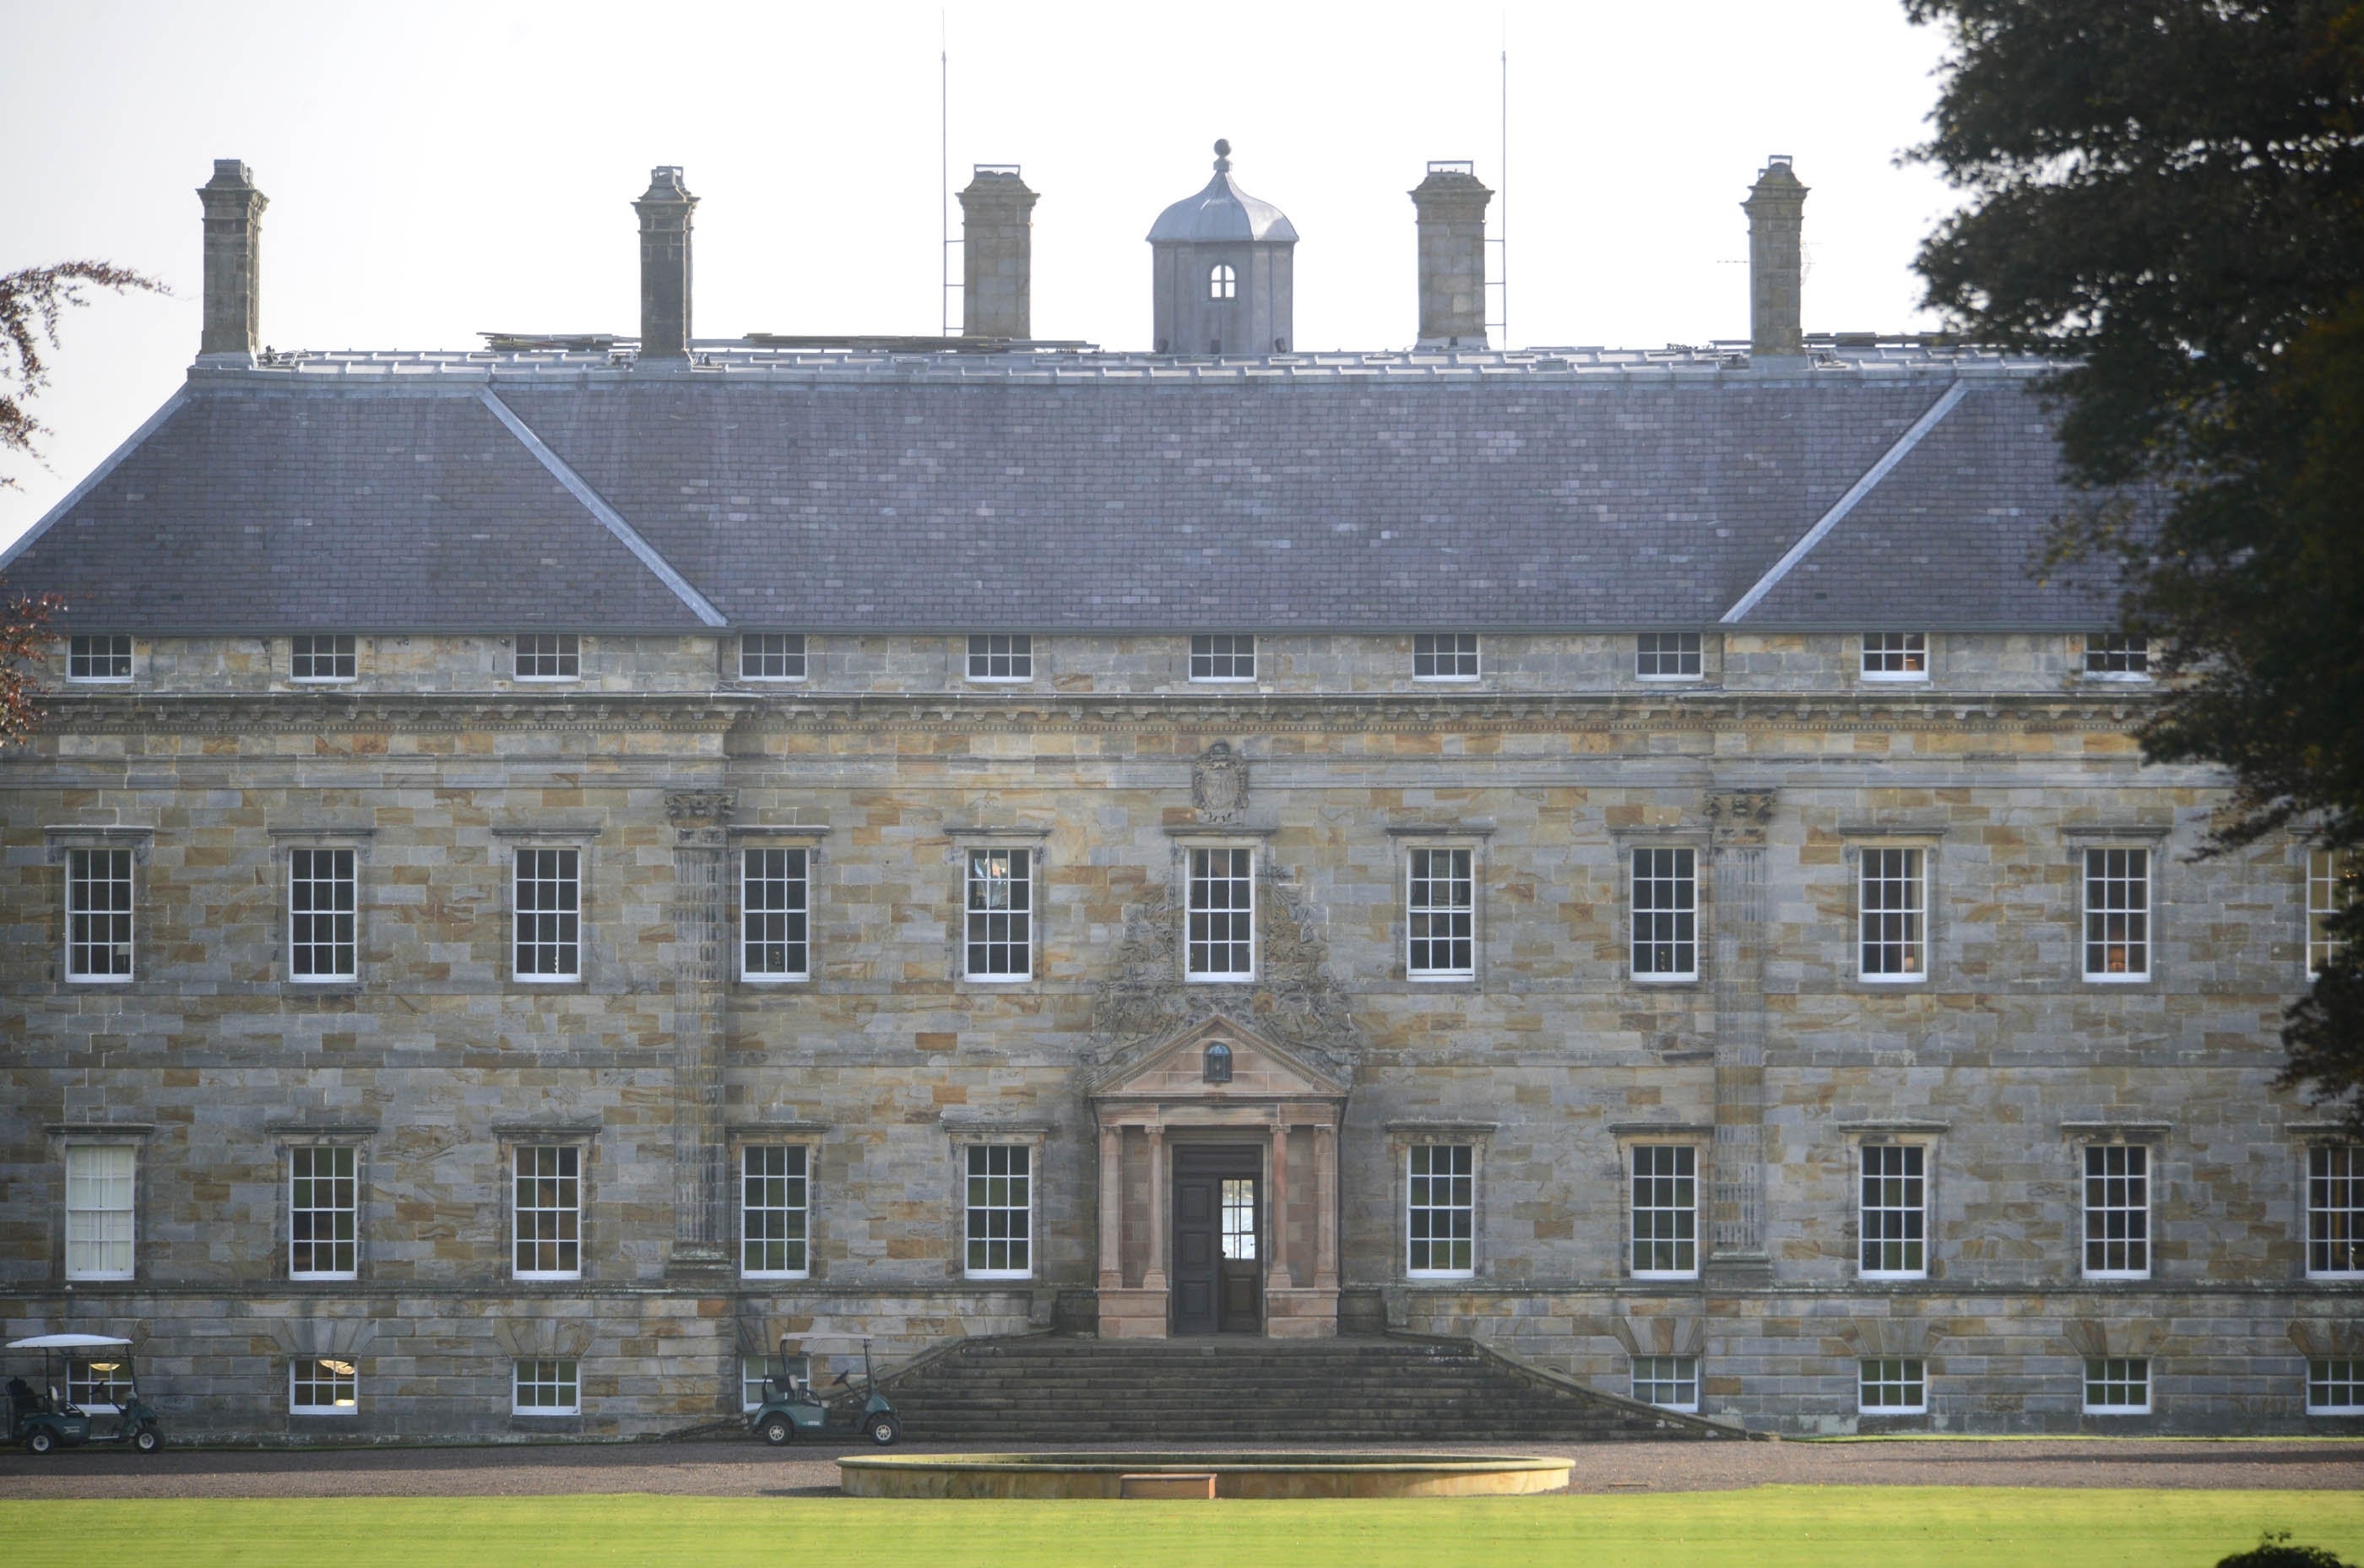 Kinross House, Perth and Kinross, Scotland, which overlooks Loch Leven where mary Queen of Scots was imprisoned in Loch Leven Castle. Singer Justin Bieber is renting the huge mansion while on his Scotland leg of his European tour. See Centre Press story CPBIEBER; Pop royalty Justin Bieber has checked himself into Scottish luxury getaway fit for a king. The 'Sorry' singer has spent thousands of pounds to rent out a huge mansion in the Scottish countryside. The 22-year-old his staying at posh Kinross House in Perthshire, while he performs at three sold-out concerts in Glasgow. He handpicked the rural mansion to enjoy the peace and quiet away from screaming fans and has been spotted by locals driving around in a golf buggy.